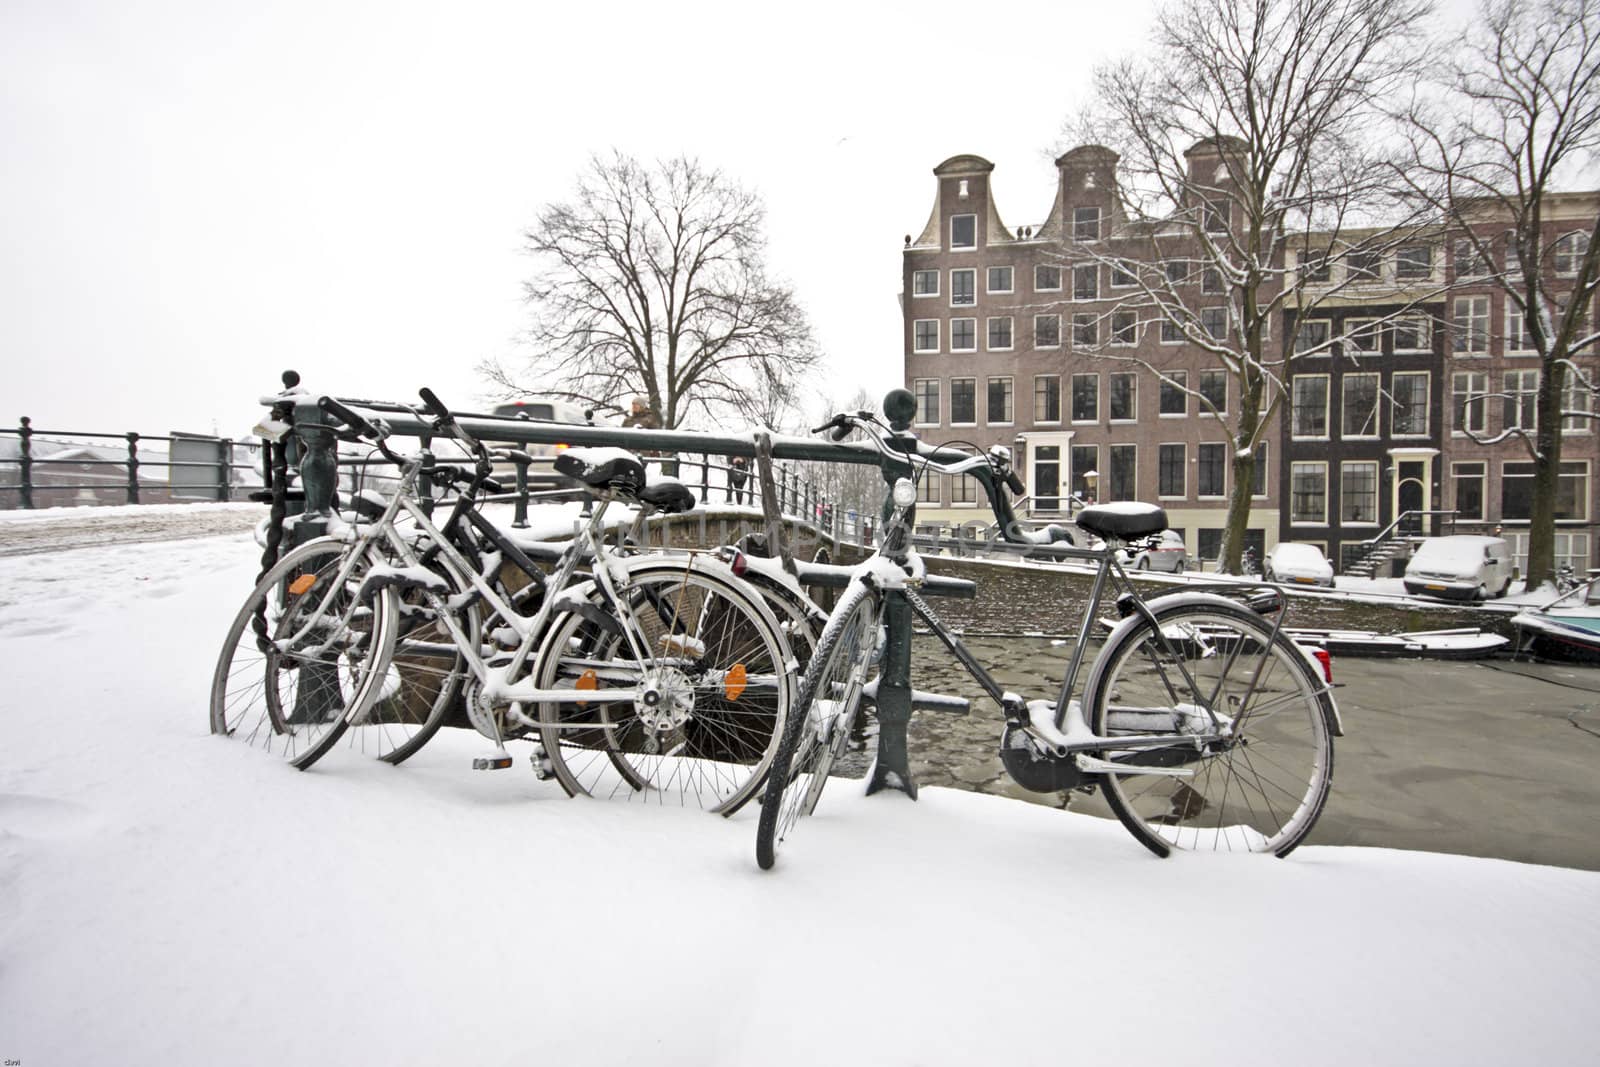 Snowy Amsterdam in wintertime in the Netherlands by devy